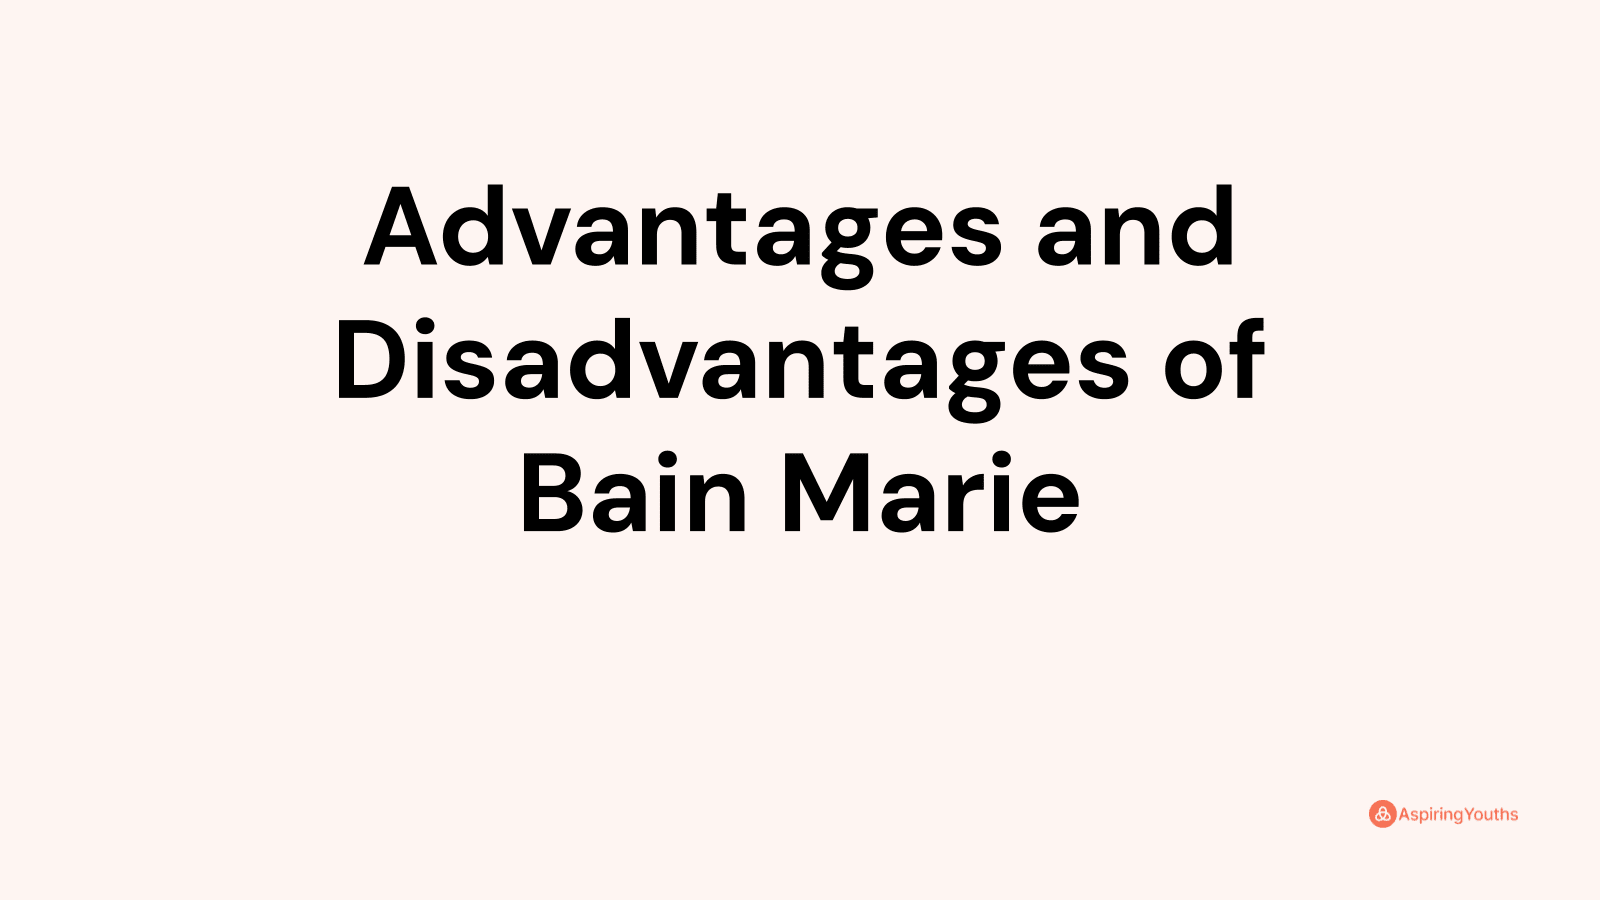 Advantages and disadvantages of Bain Marie